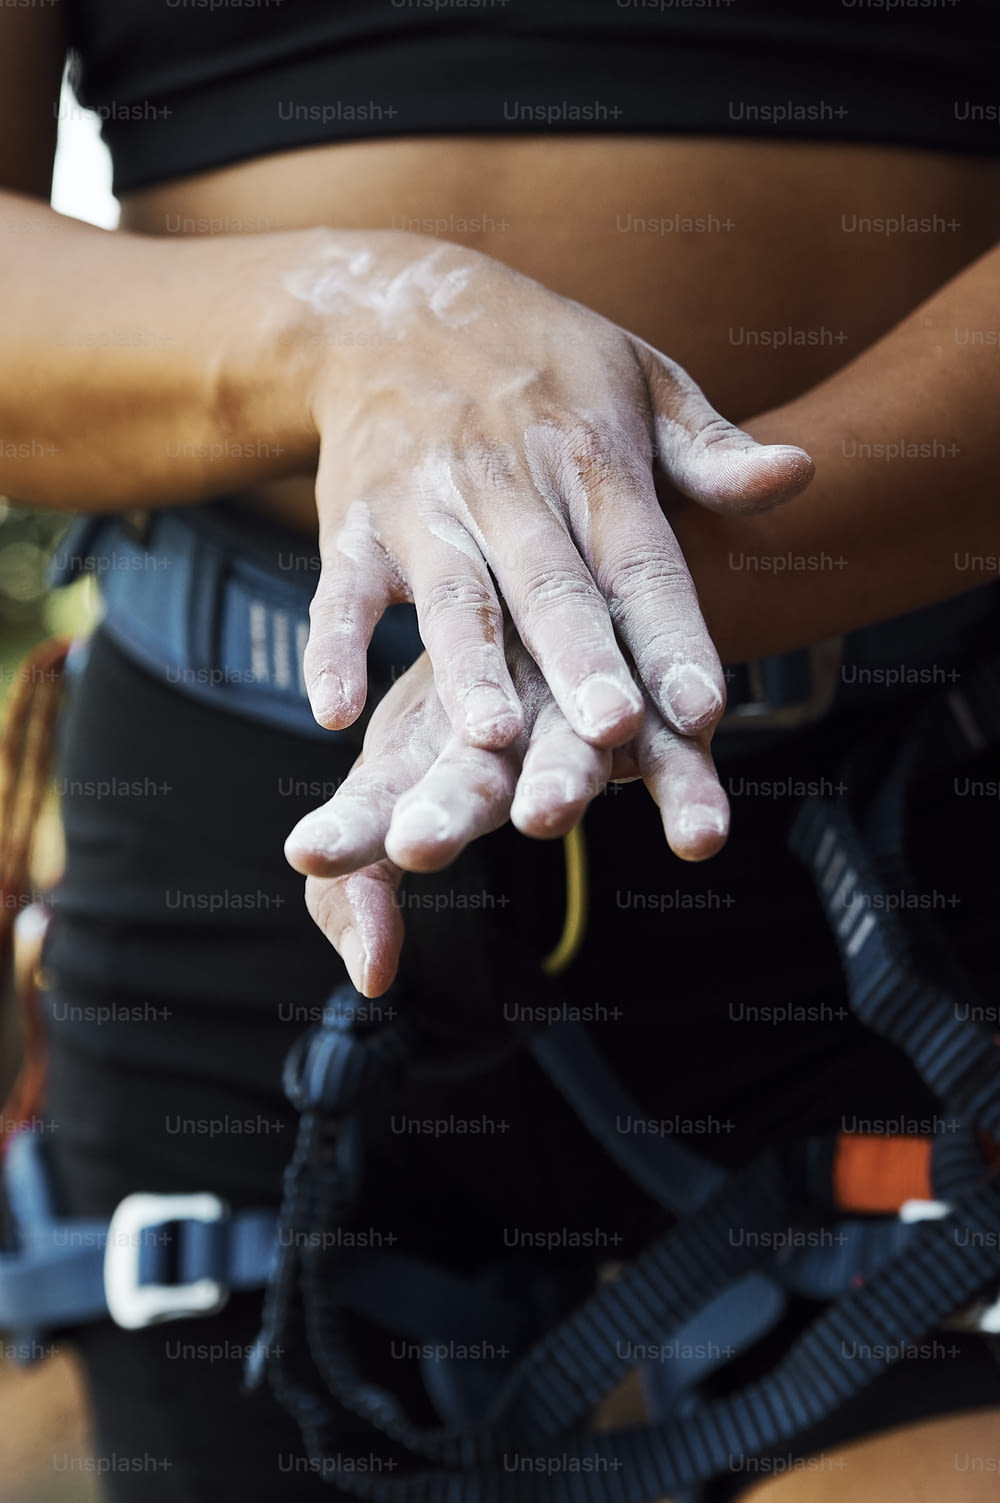 a close up of a person's hands with mud on them